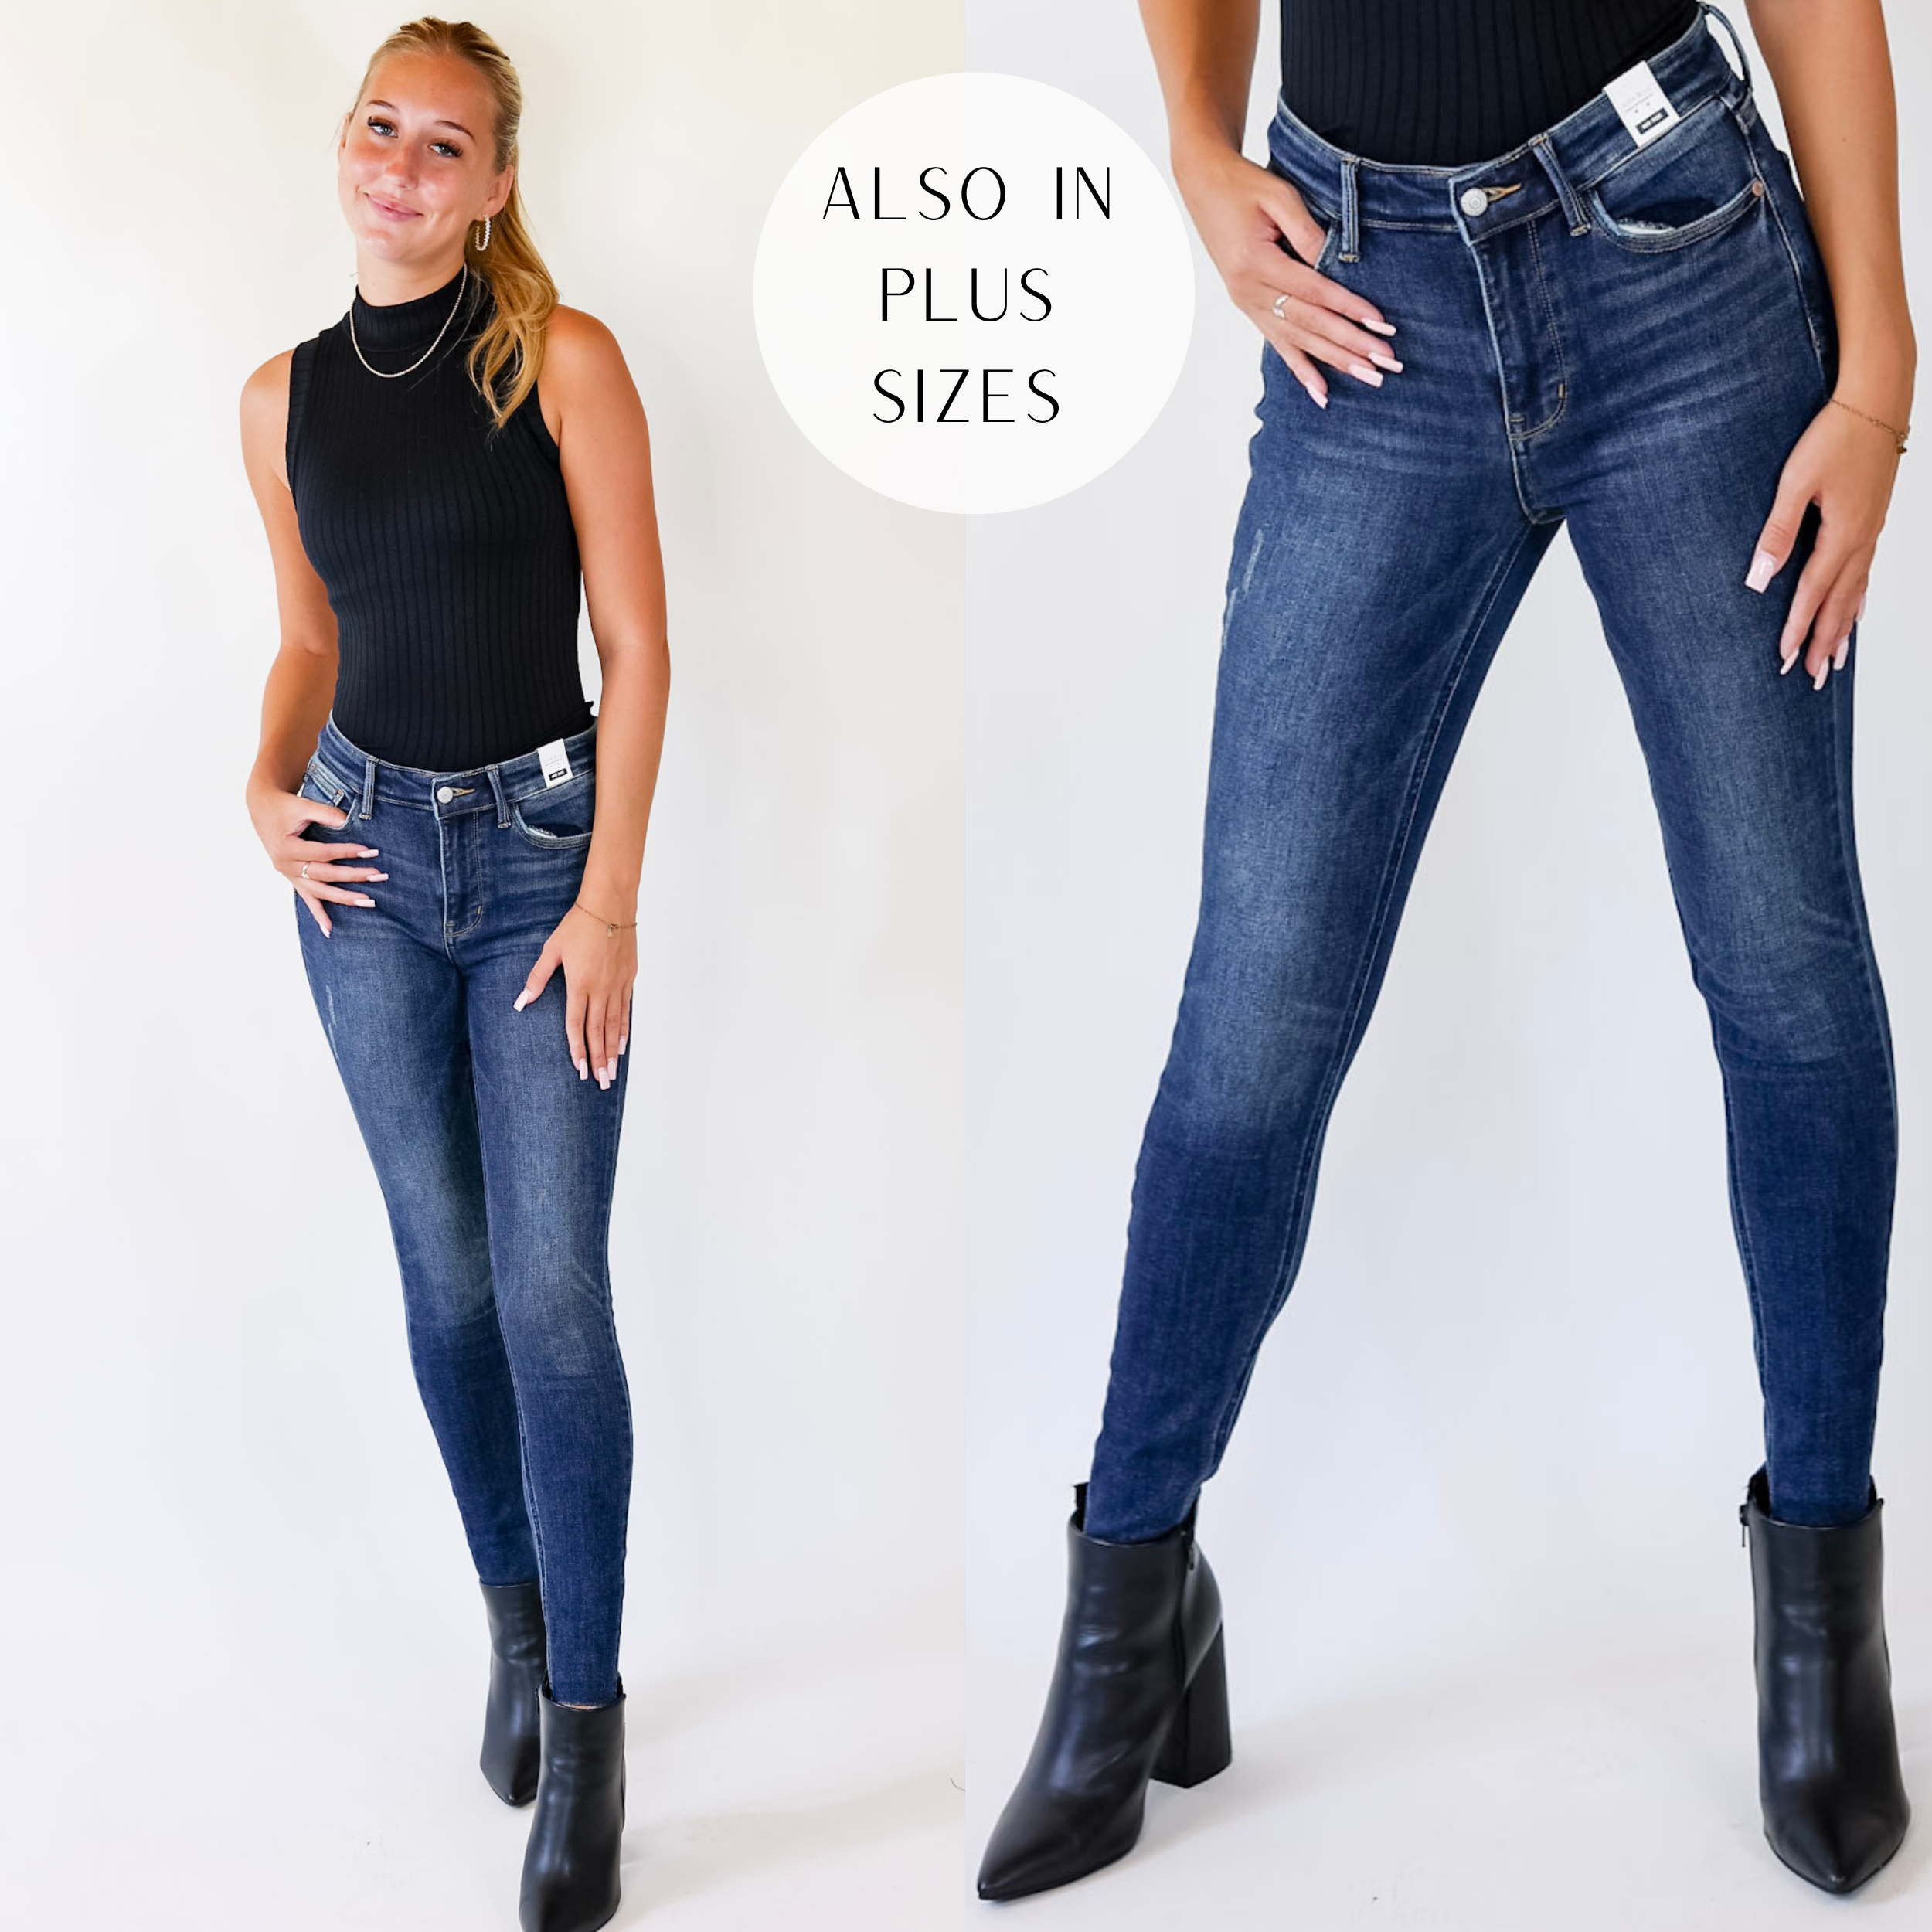 Model is wearing a pair of dark wash skinny jeans with a raw hem. Model has these jeans paired with black booties, a black tank top, and gold jewelry.